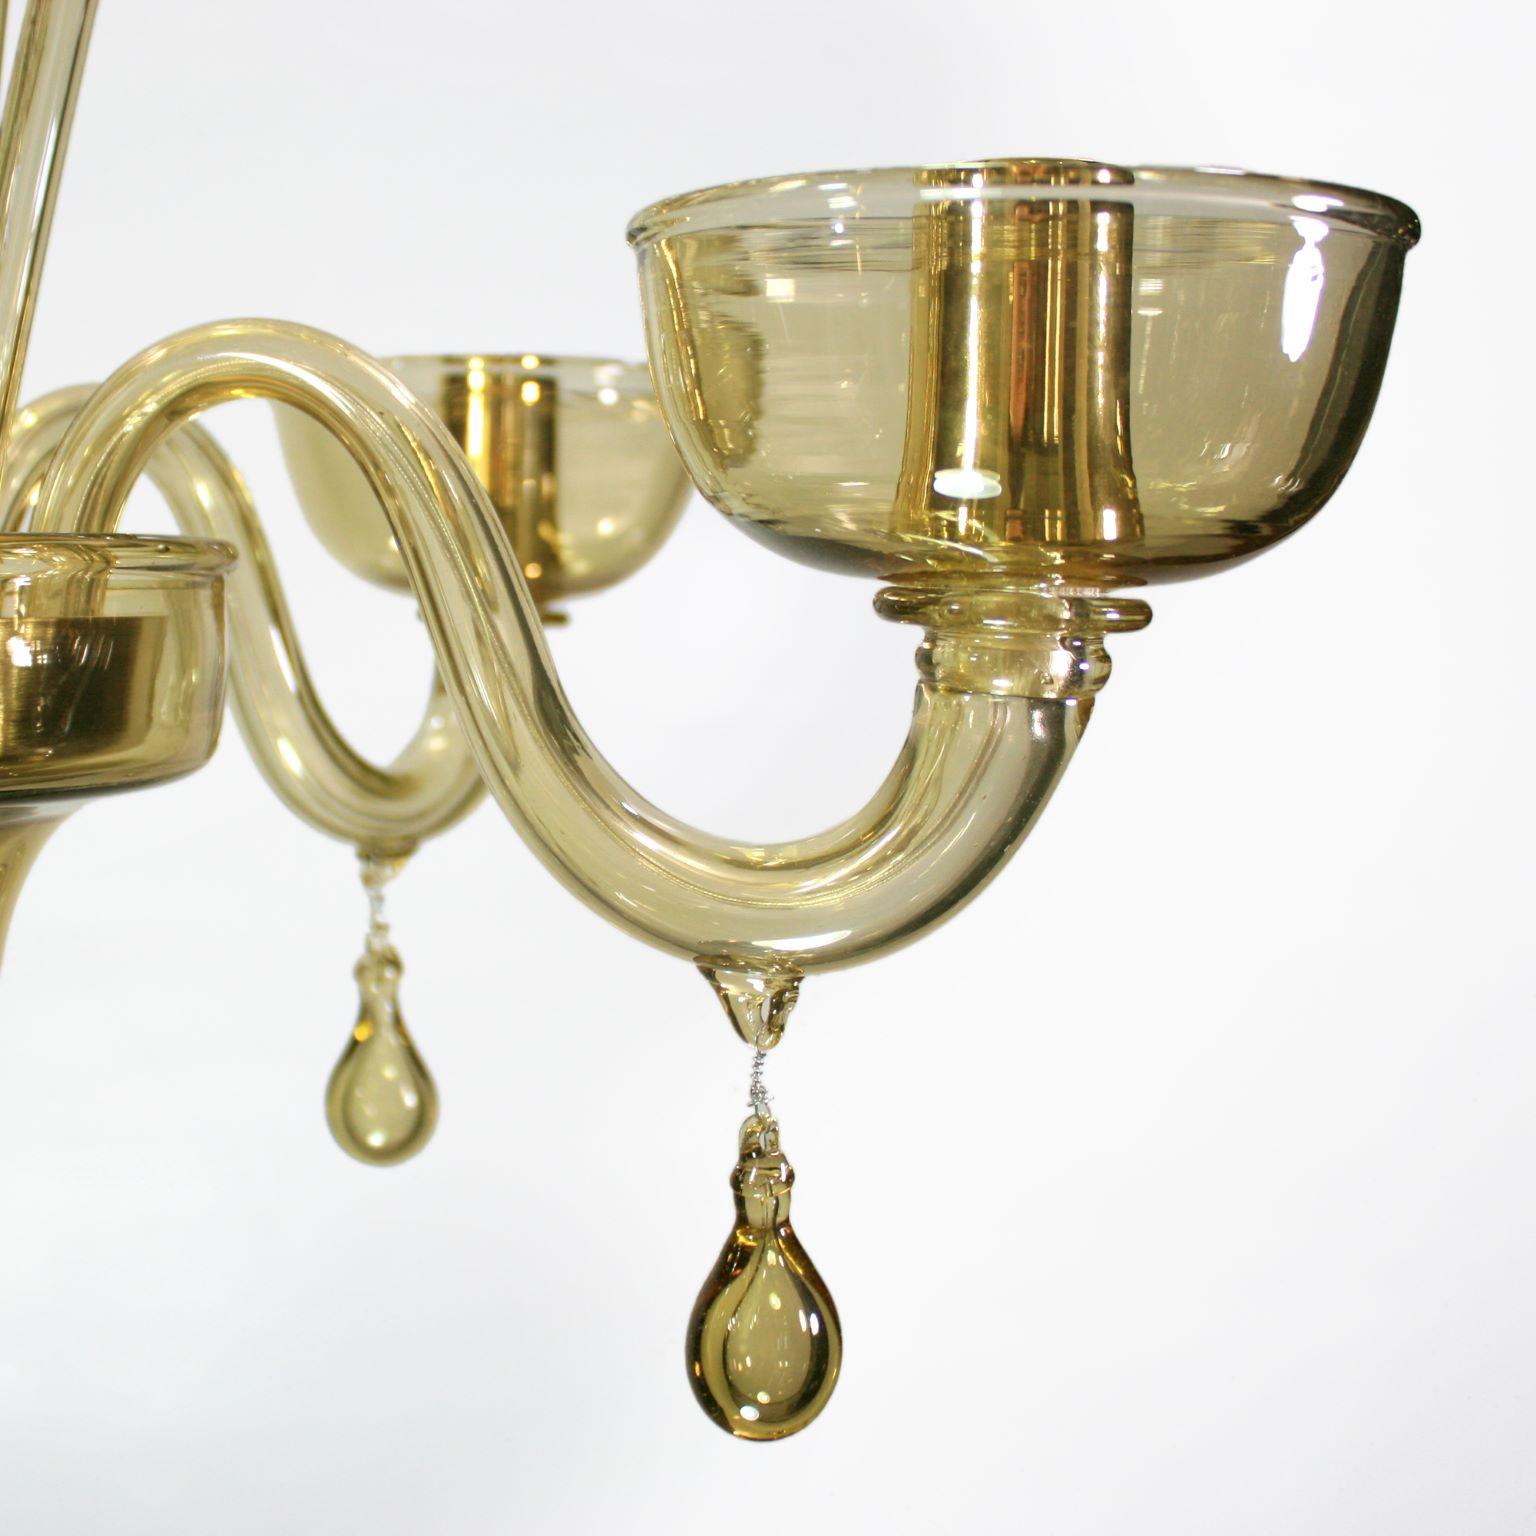 This venetian glass chandelier is in straw smooth Murano glass and has pastorals and pendants. The arms have upwards glass cups.
It is characterized by a romantic and delicate shape. The stem is characterized by shaped glass details. The glass drops